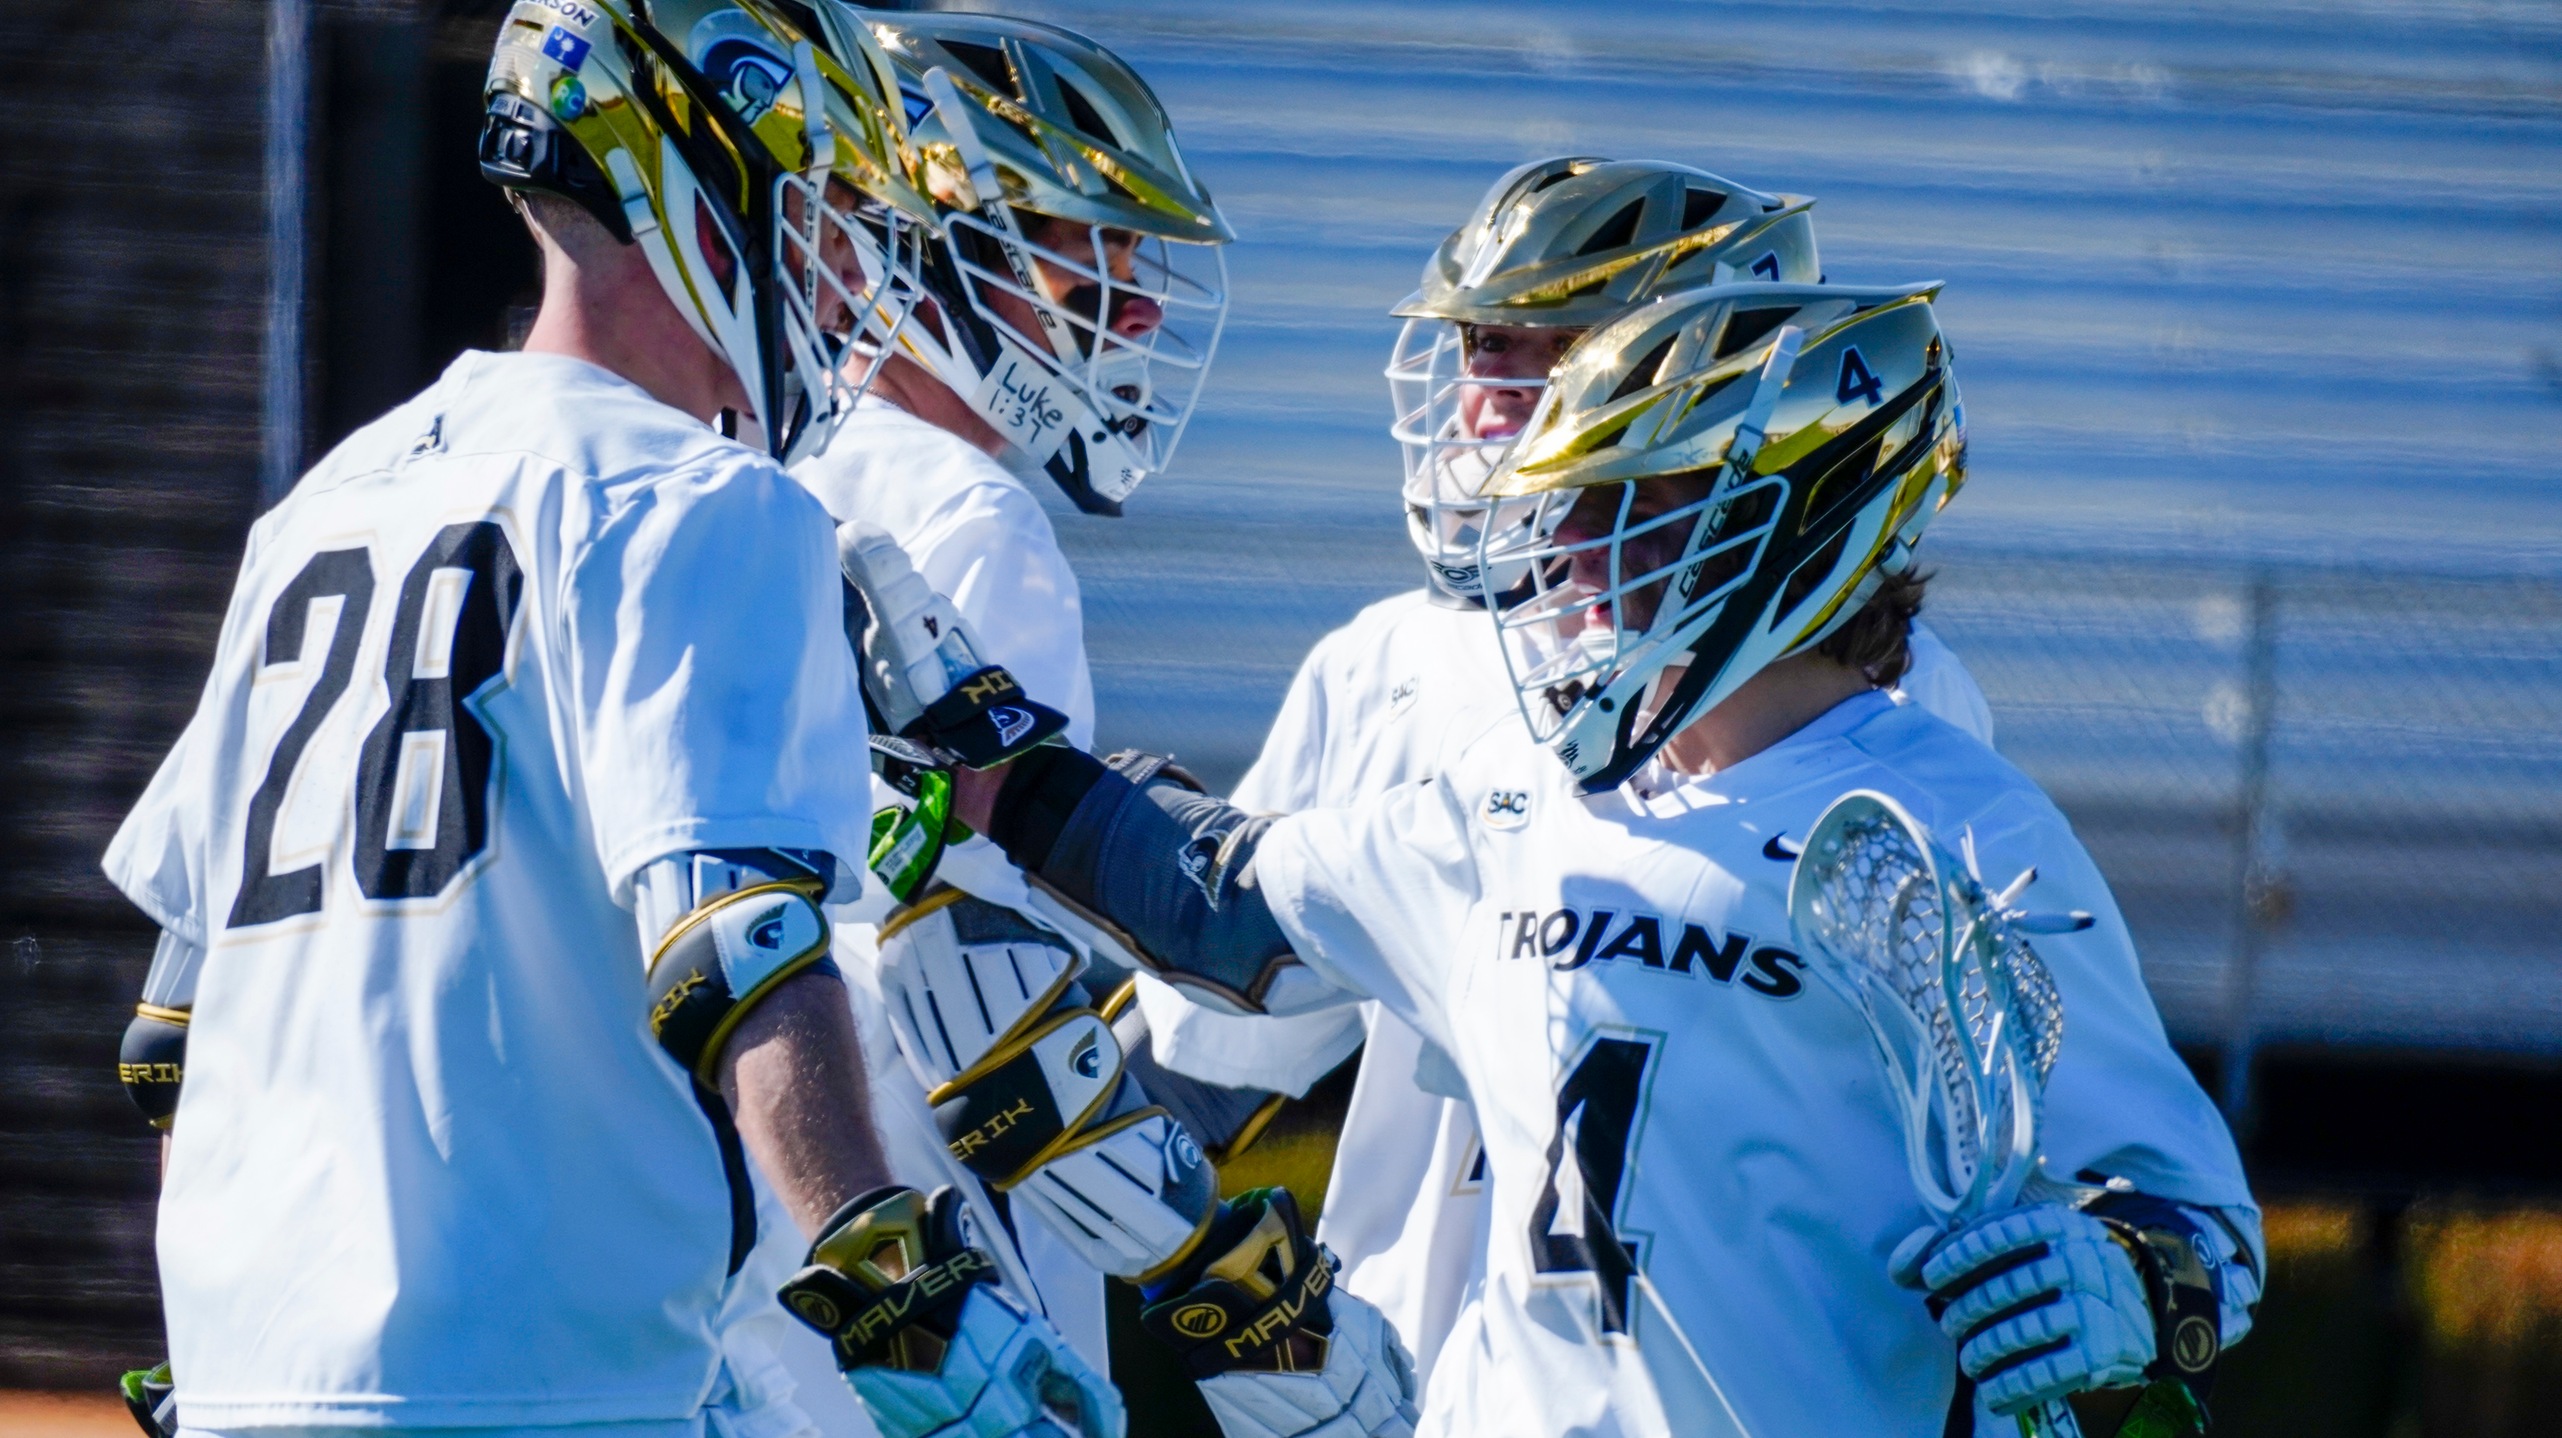 Rodgers Leads Trojans With 11 Goals in 32-12 Win Over Chowan